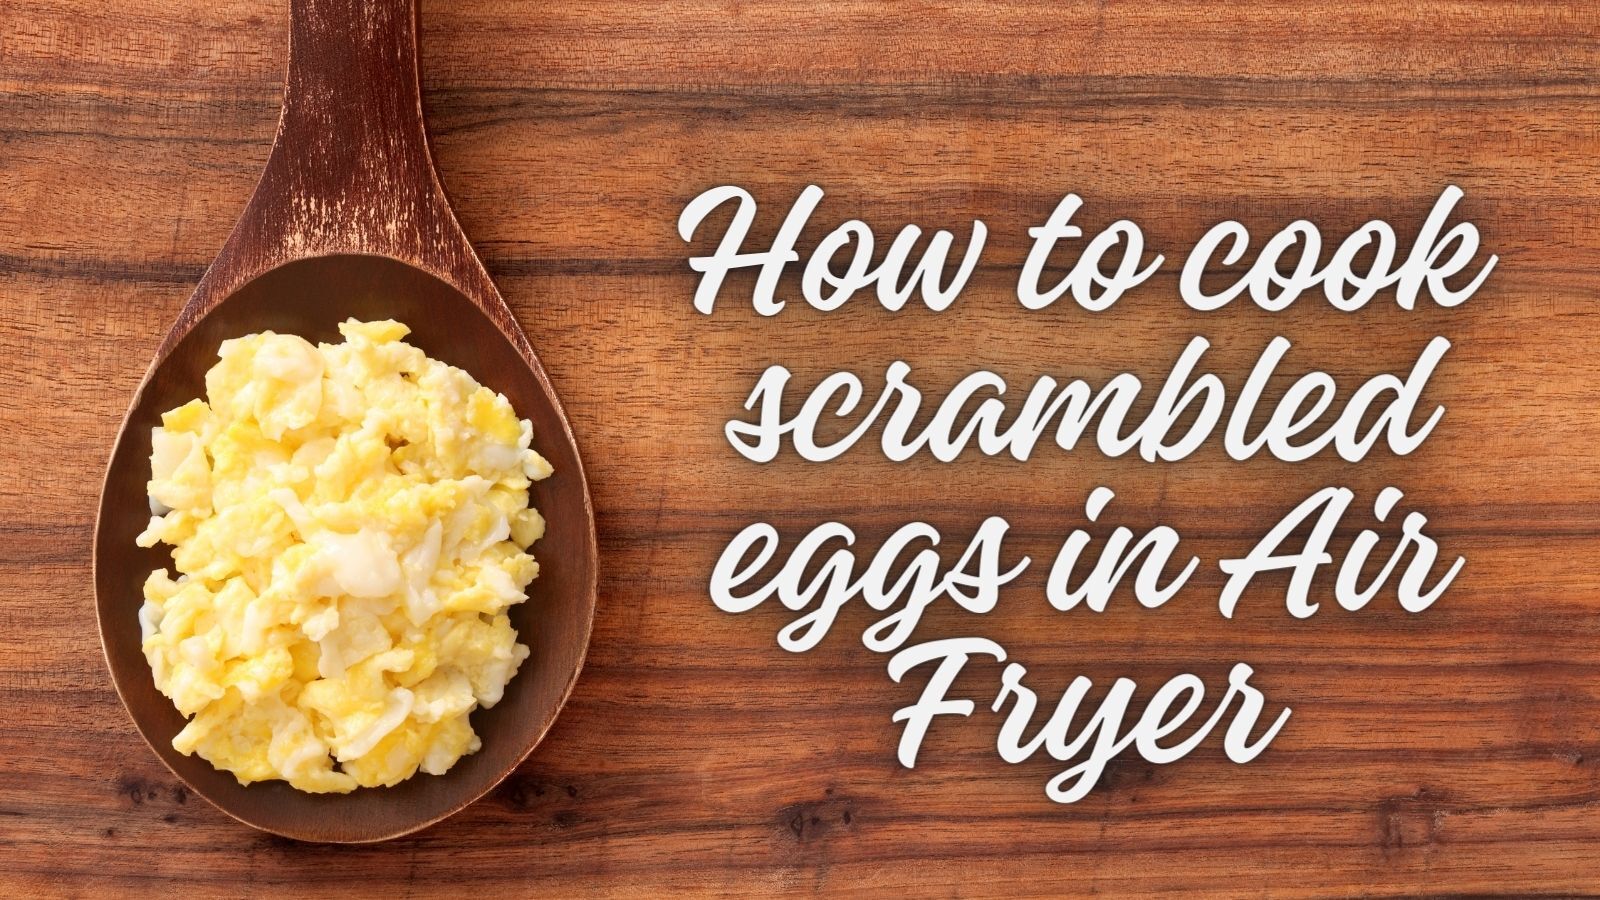 How to Cook Scrambled Eggs in Air Fryer